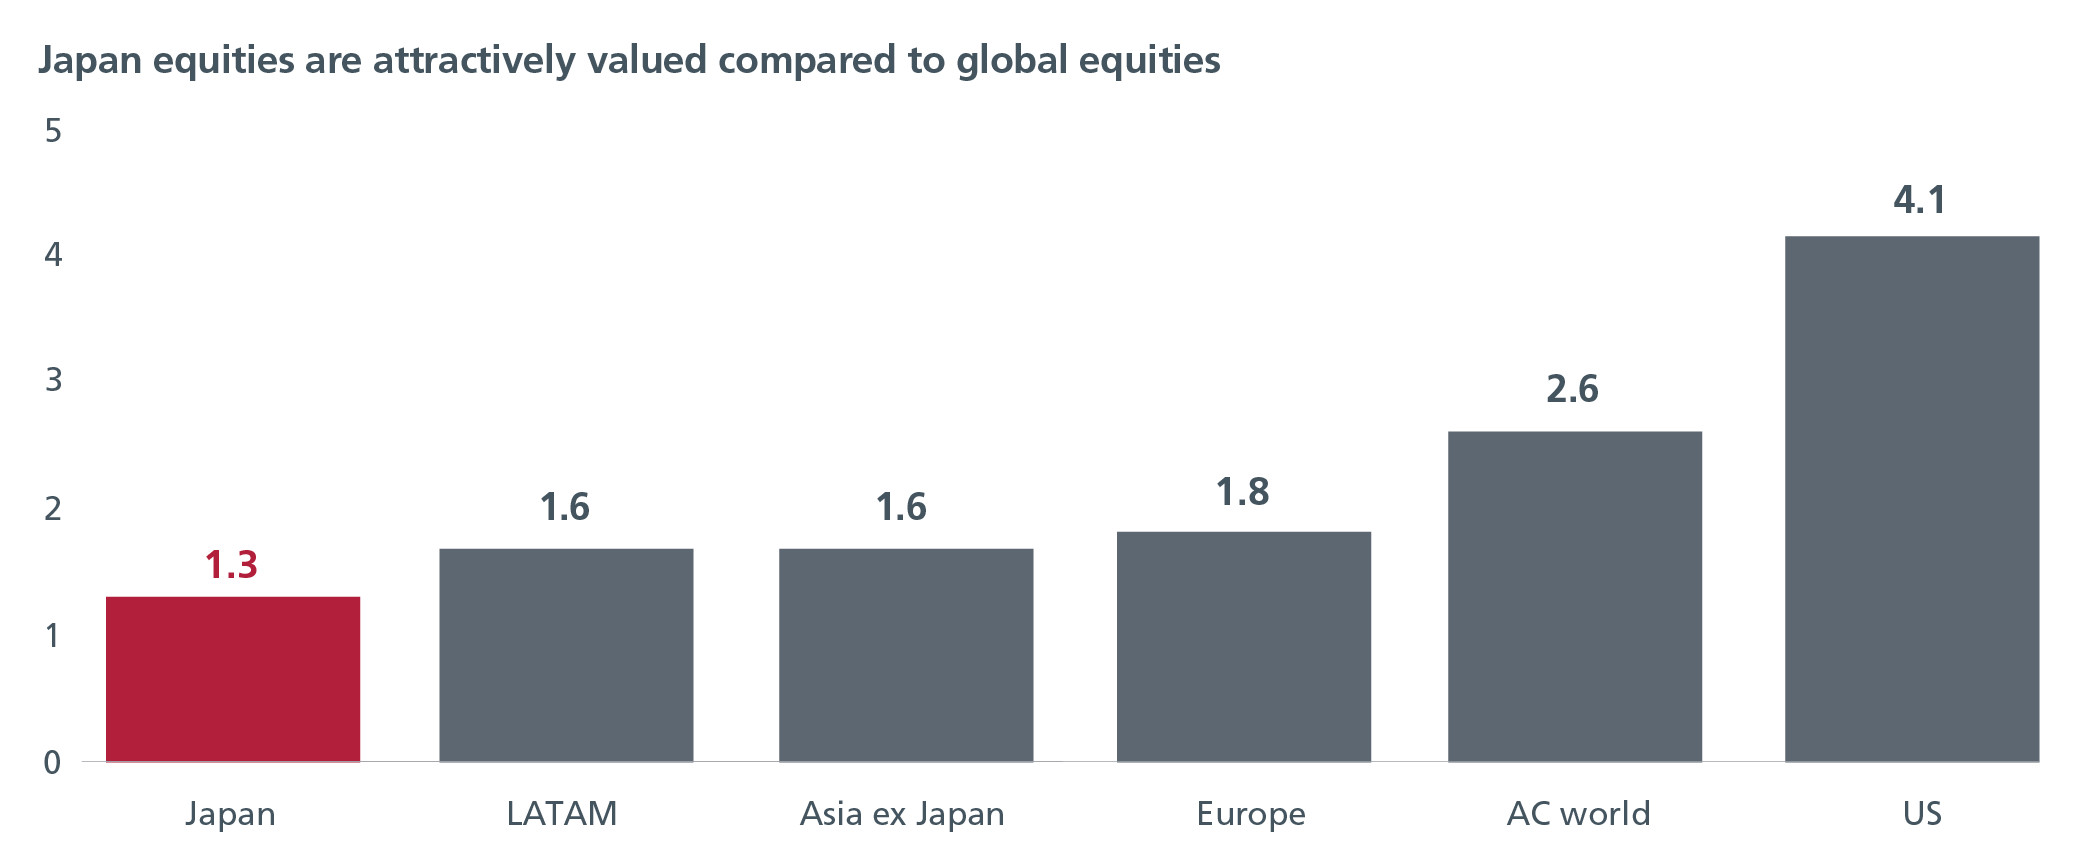 A graph showing the value of Japan equities compared to global equities